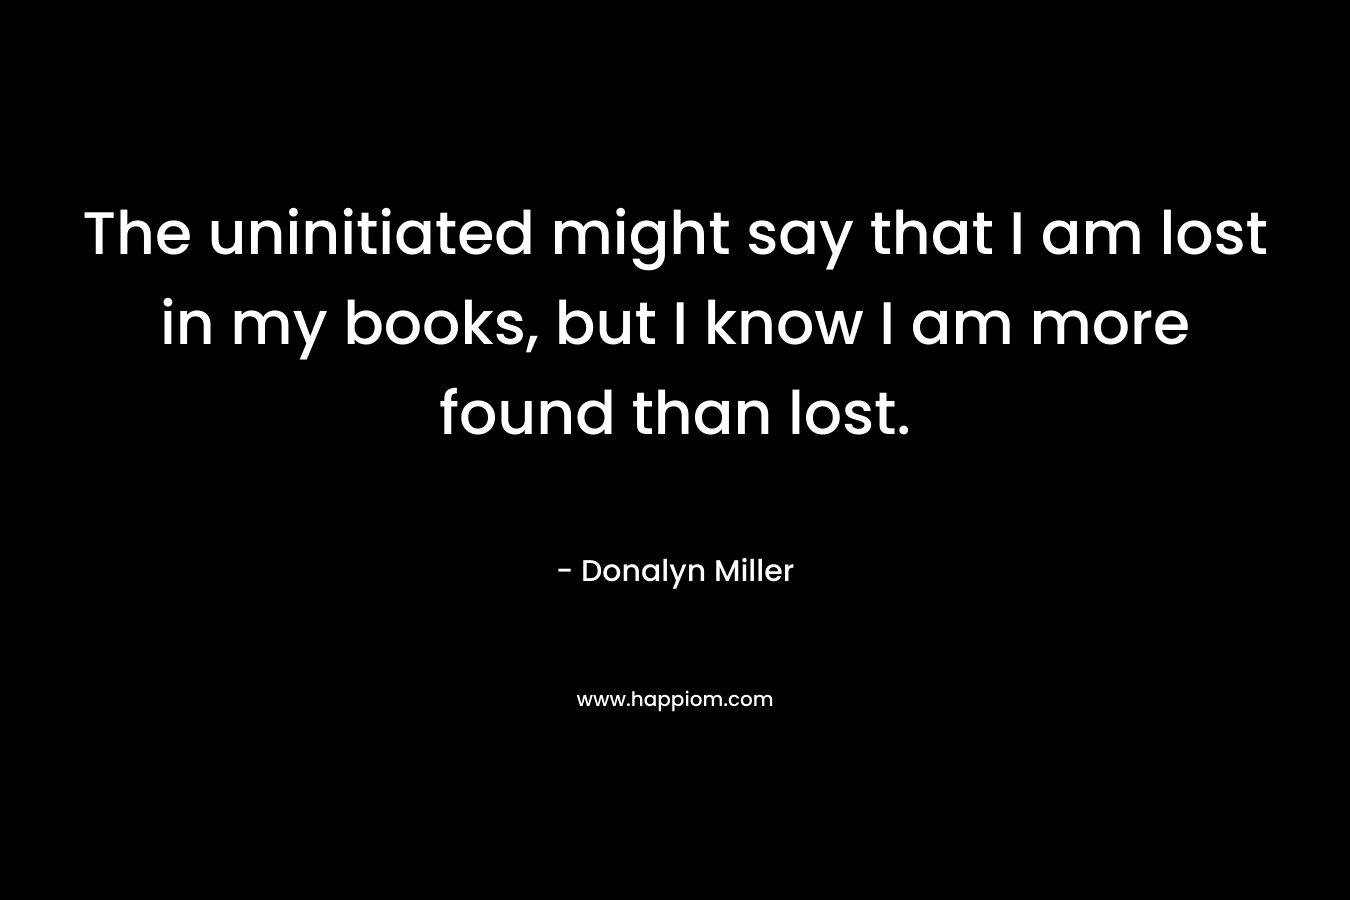 The uninitiated might say that I am lost in my books, but I know I am more found than lost. – Donalyn Miller